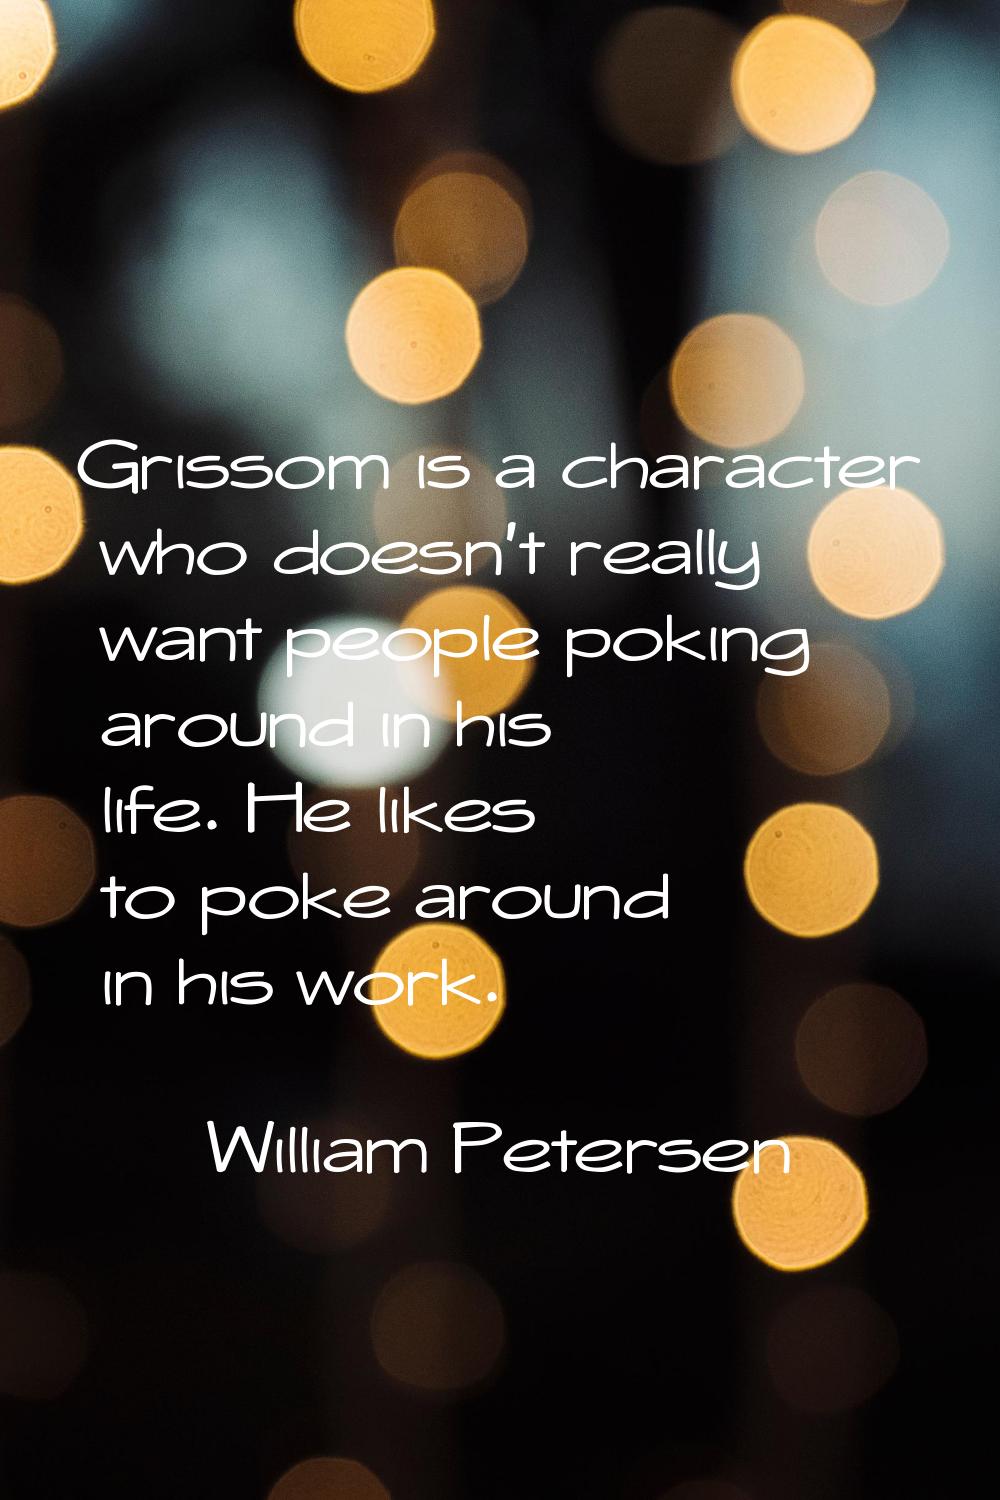 Grissom is a character who doesn't really want people poking around in his life. He likes to poke a